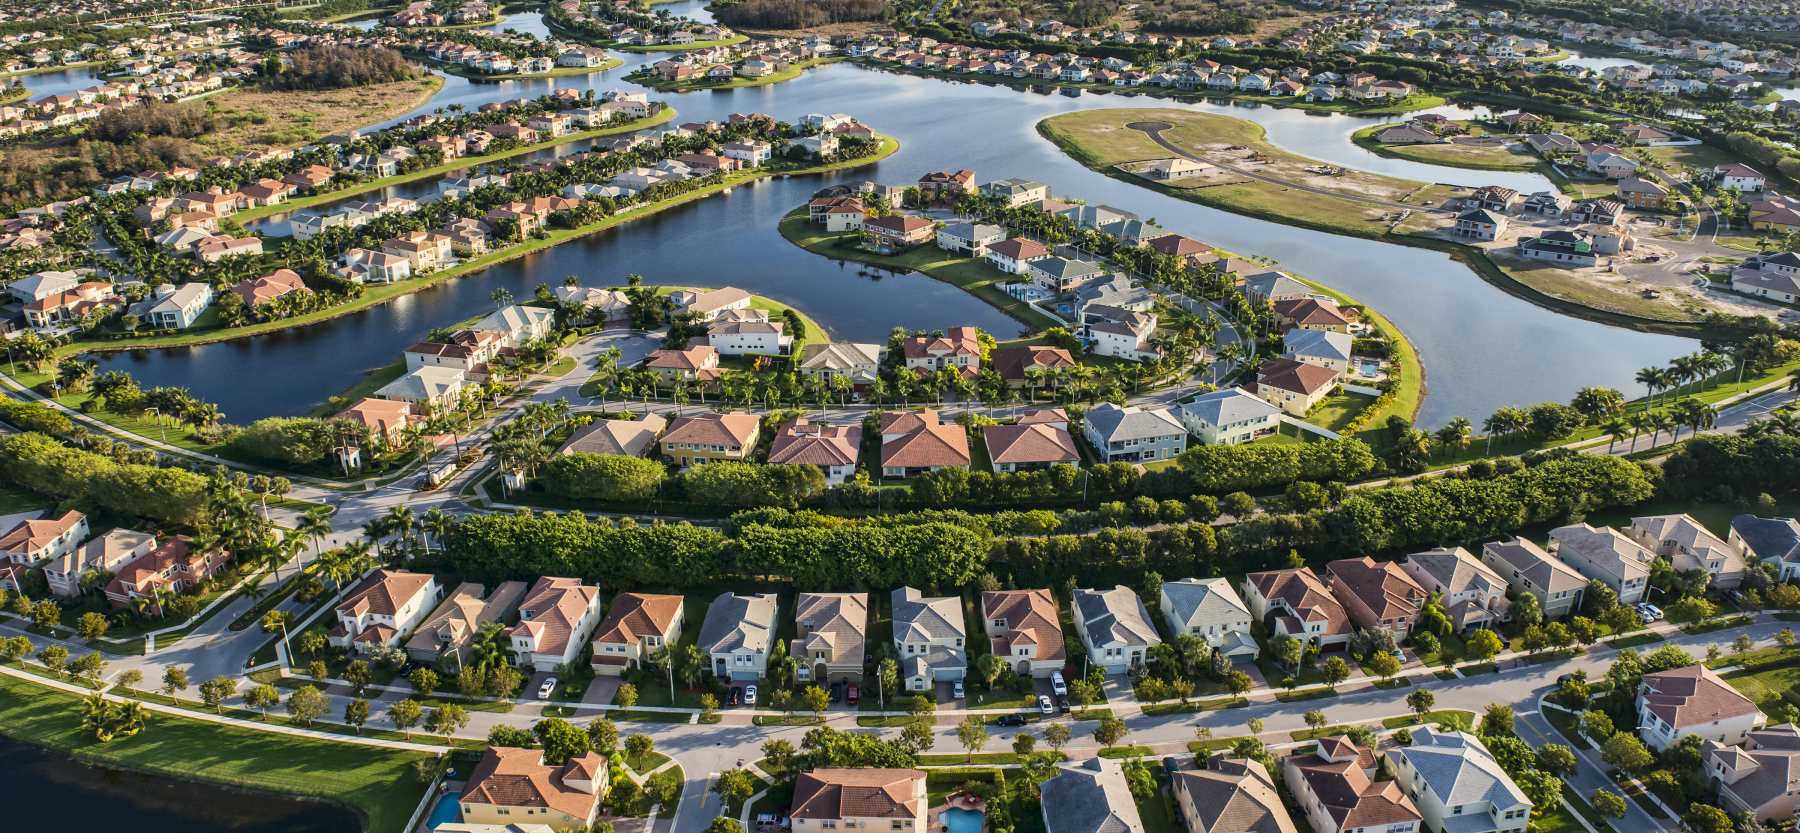 How to Successfully Design and Market a Master-Planned Community